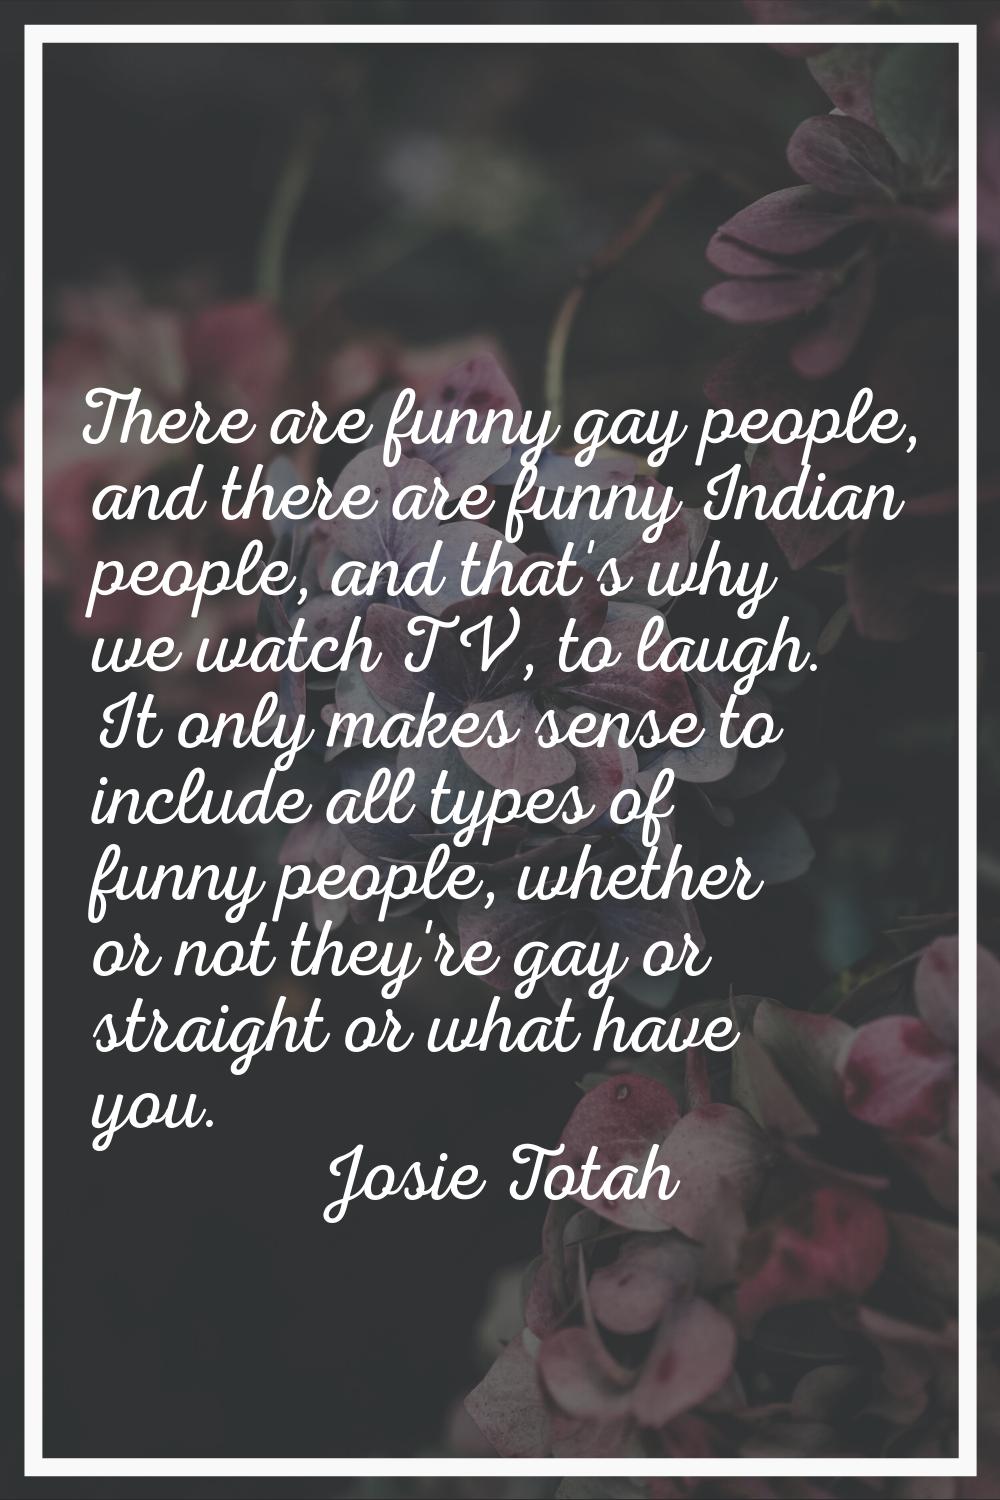 There are funny gay people, and there are funny Indian people, and that's why we watch TV, to laugh